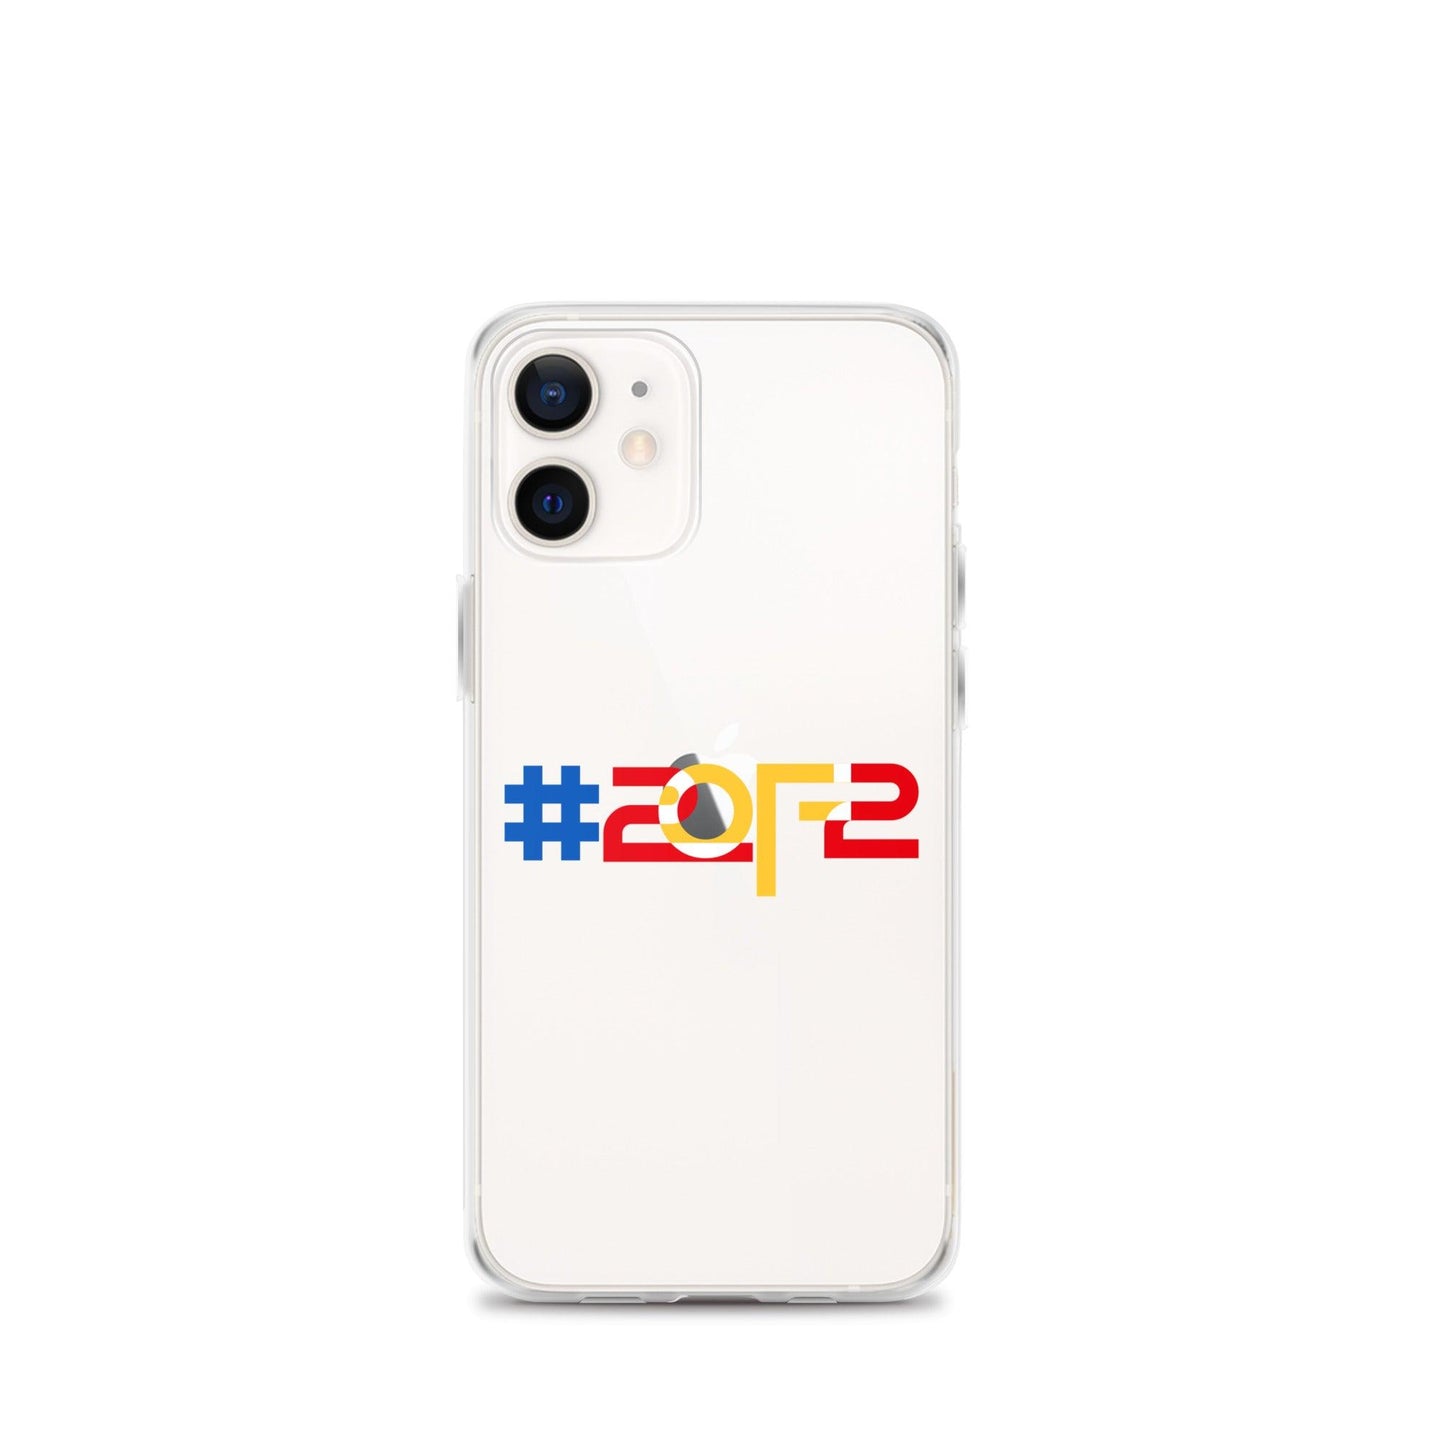 Cobee Bryant "2 of 2" iPhone Case - Fan Arch